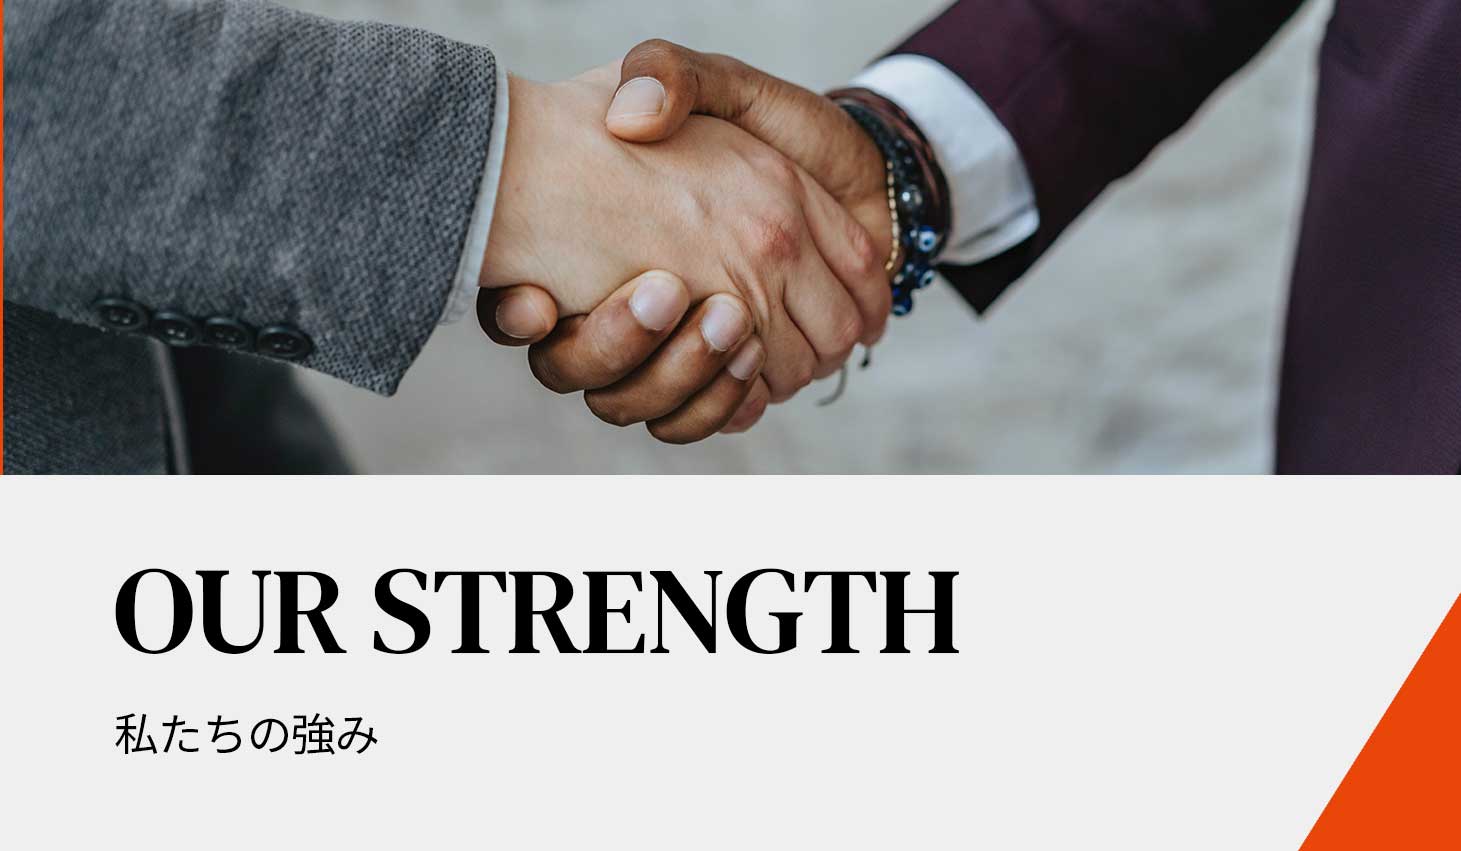 OUR STRENGTH 私たちの強み